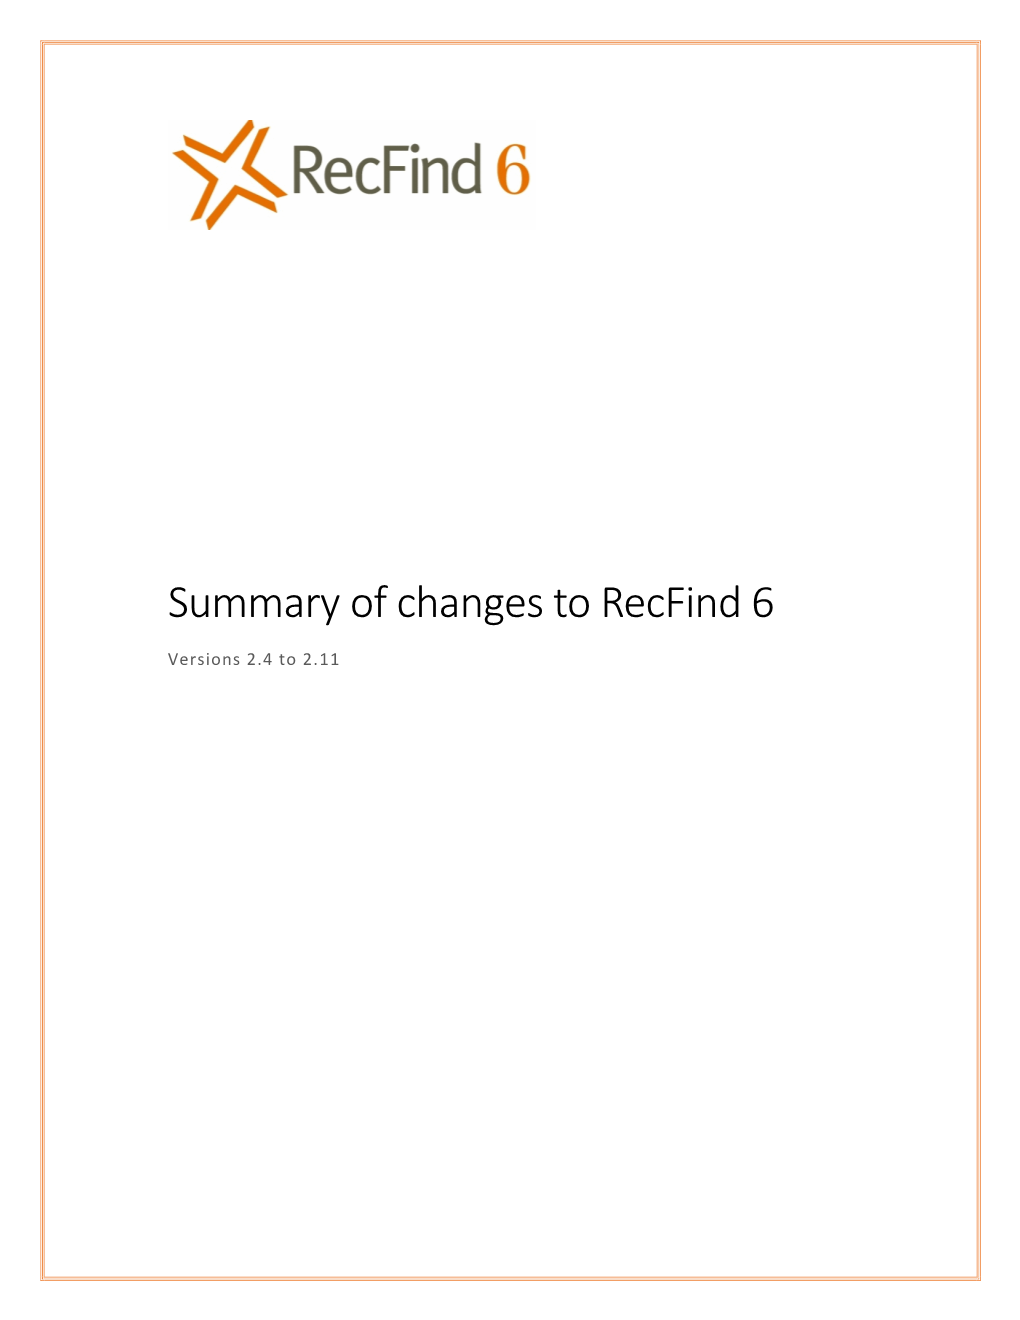 Summary of Changes to Recfind 6